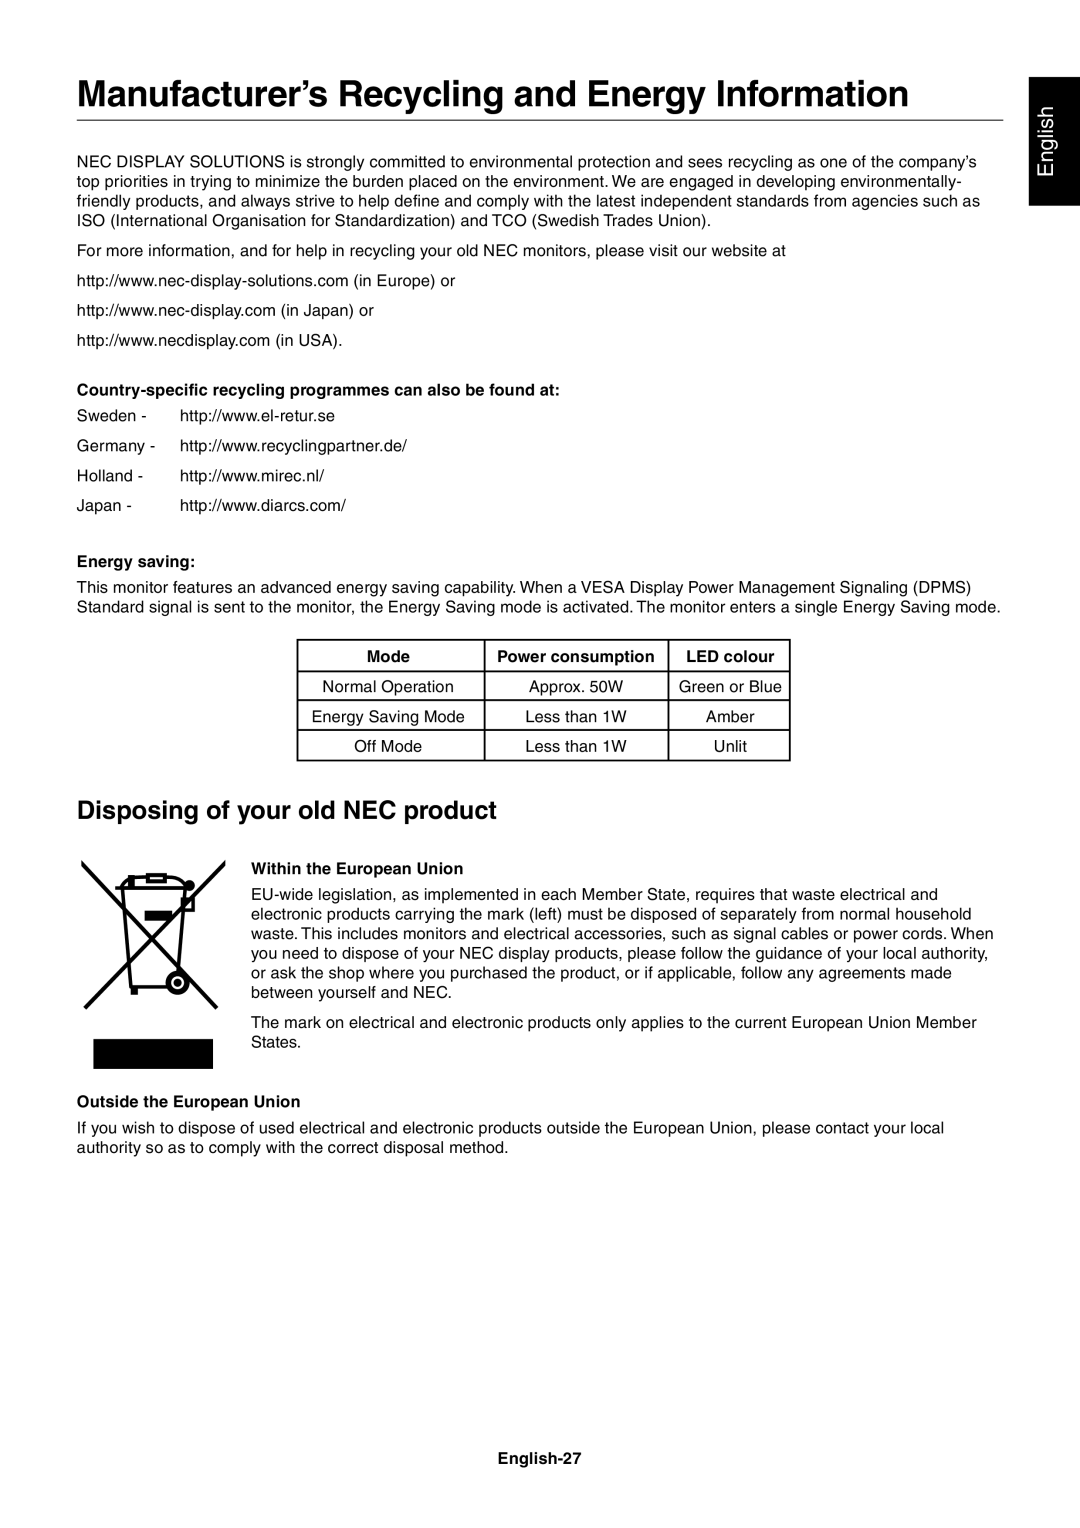 NEC LCD2090UXI user manual Manufacturer’s Recycling and Energy Information, Disposing of your old NEC product, English 